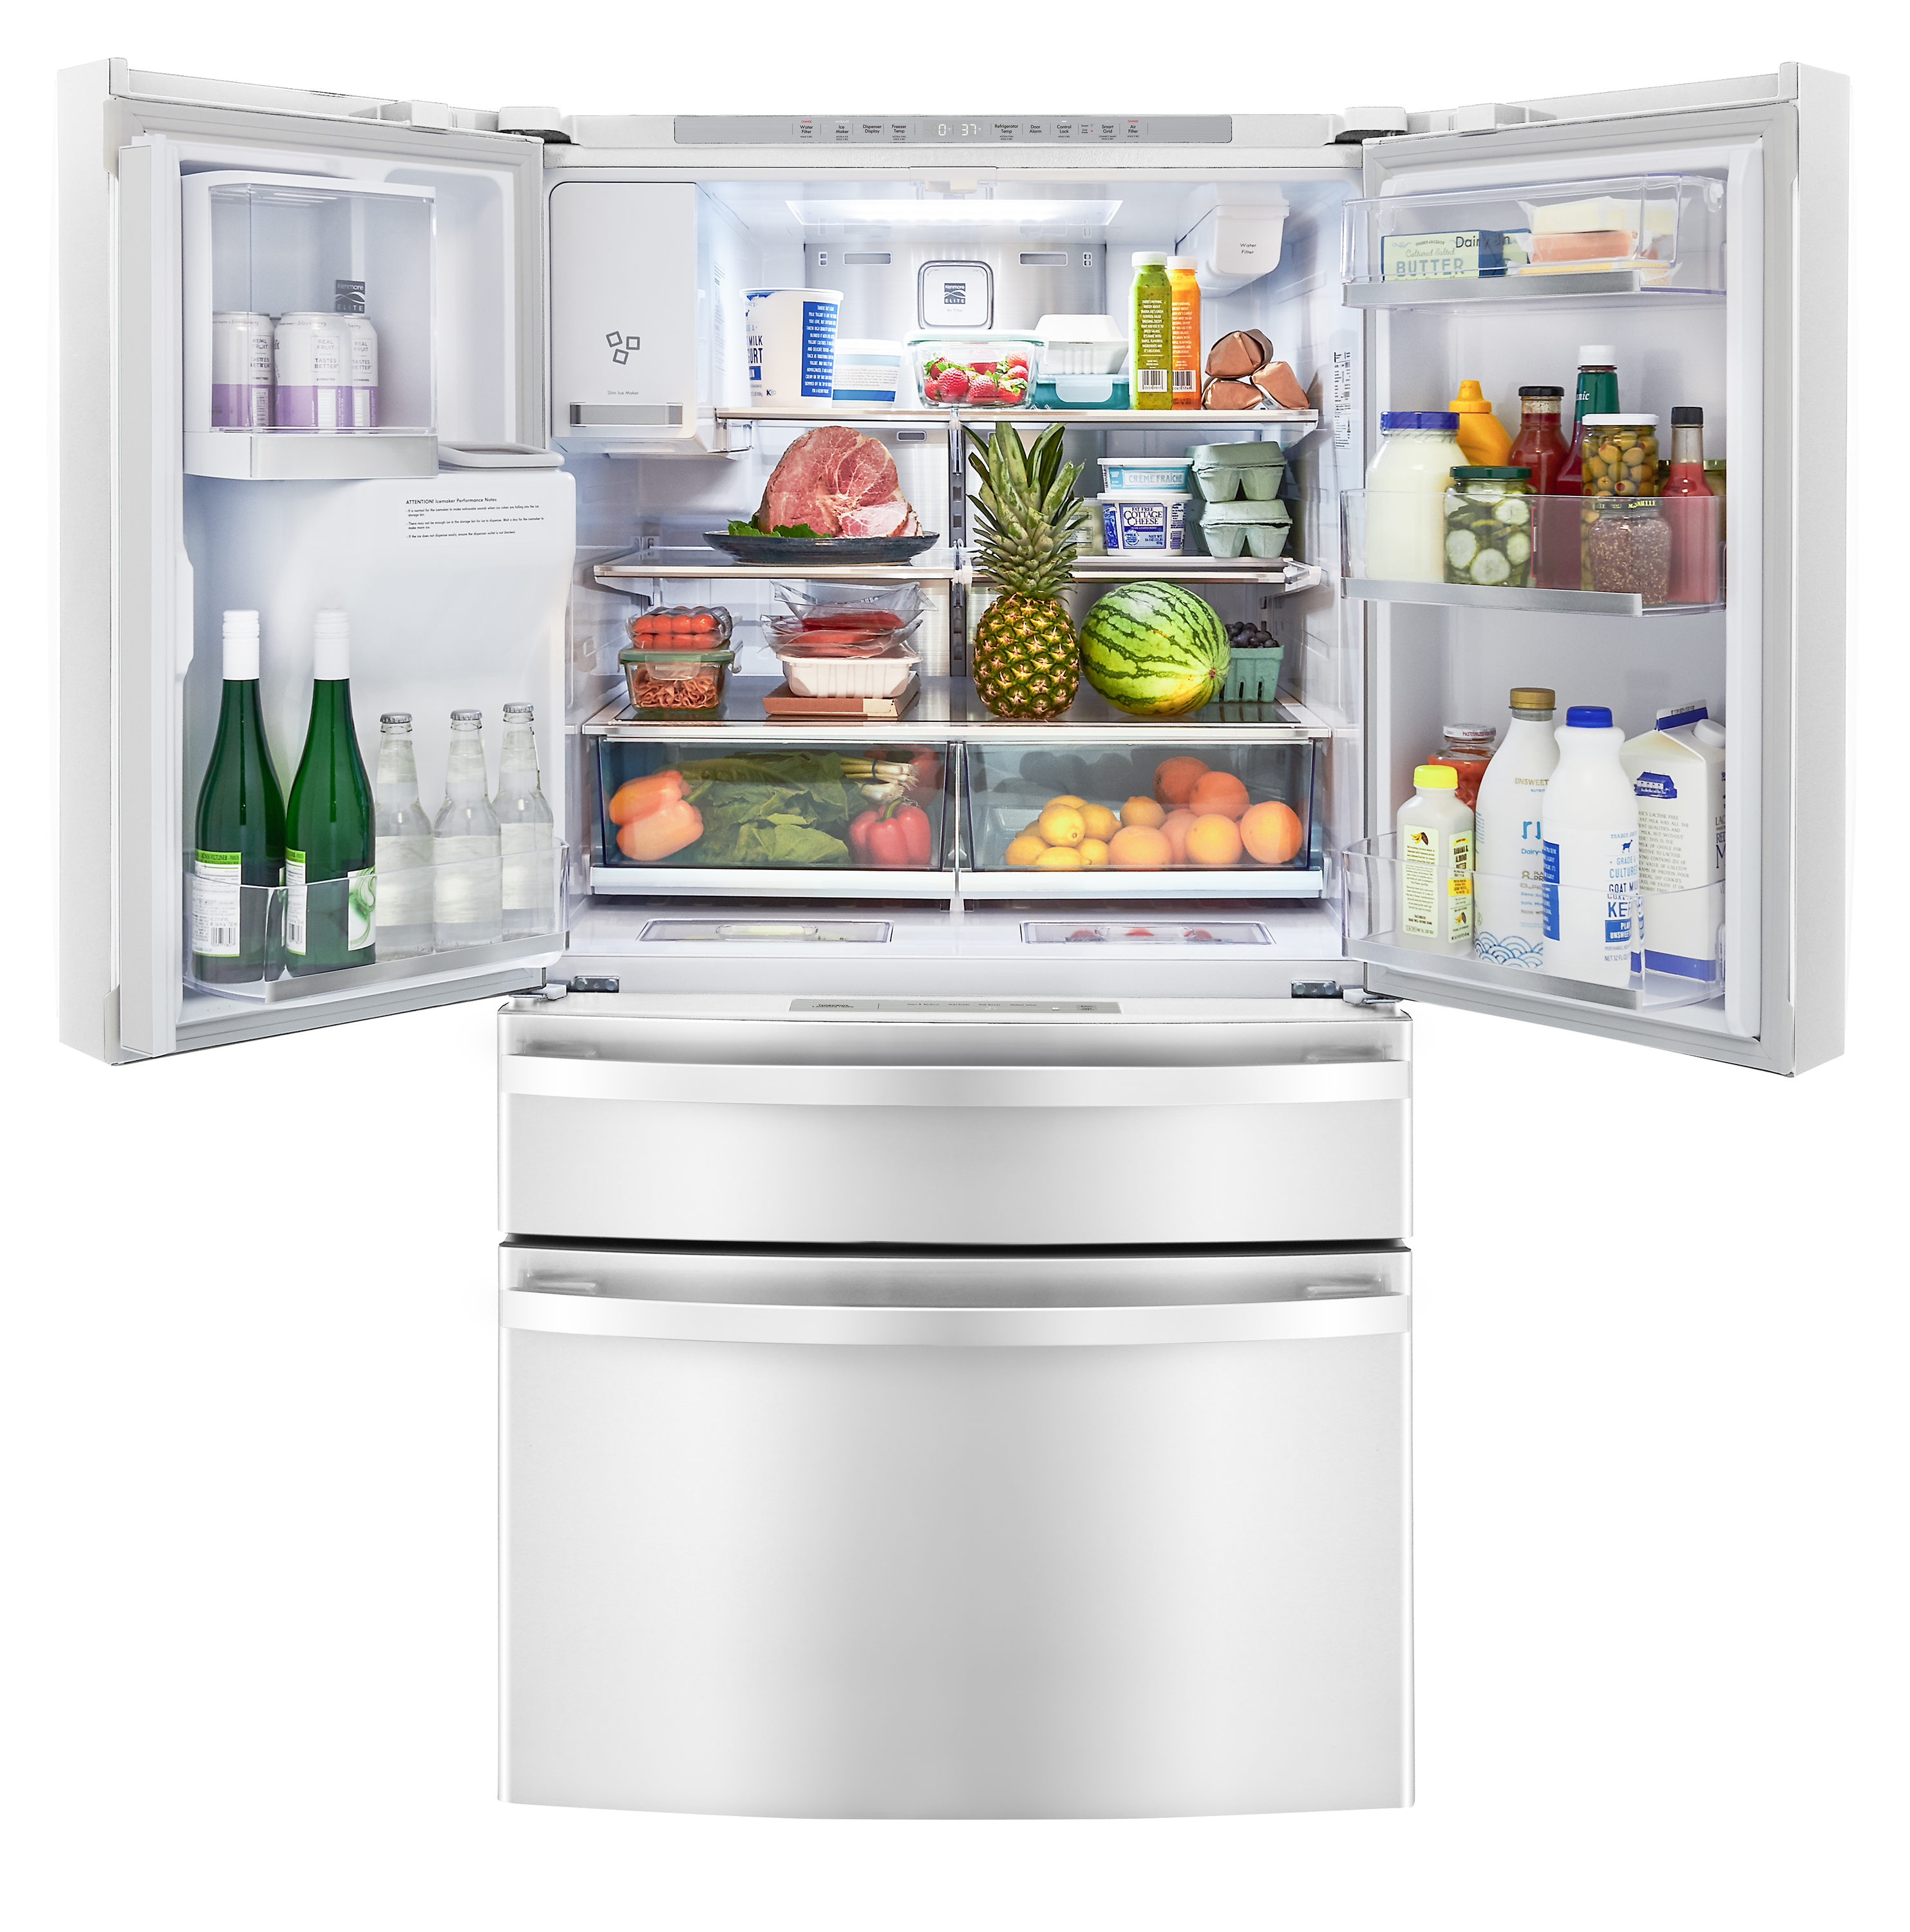 Kenmore Elite 36 French Door Refrigerator,Full Size,White 888632 – APPLIANCE  BAY AREA